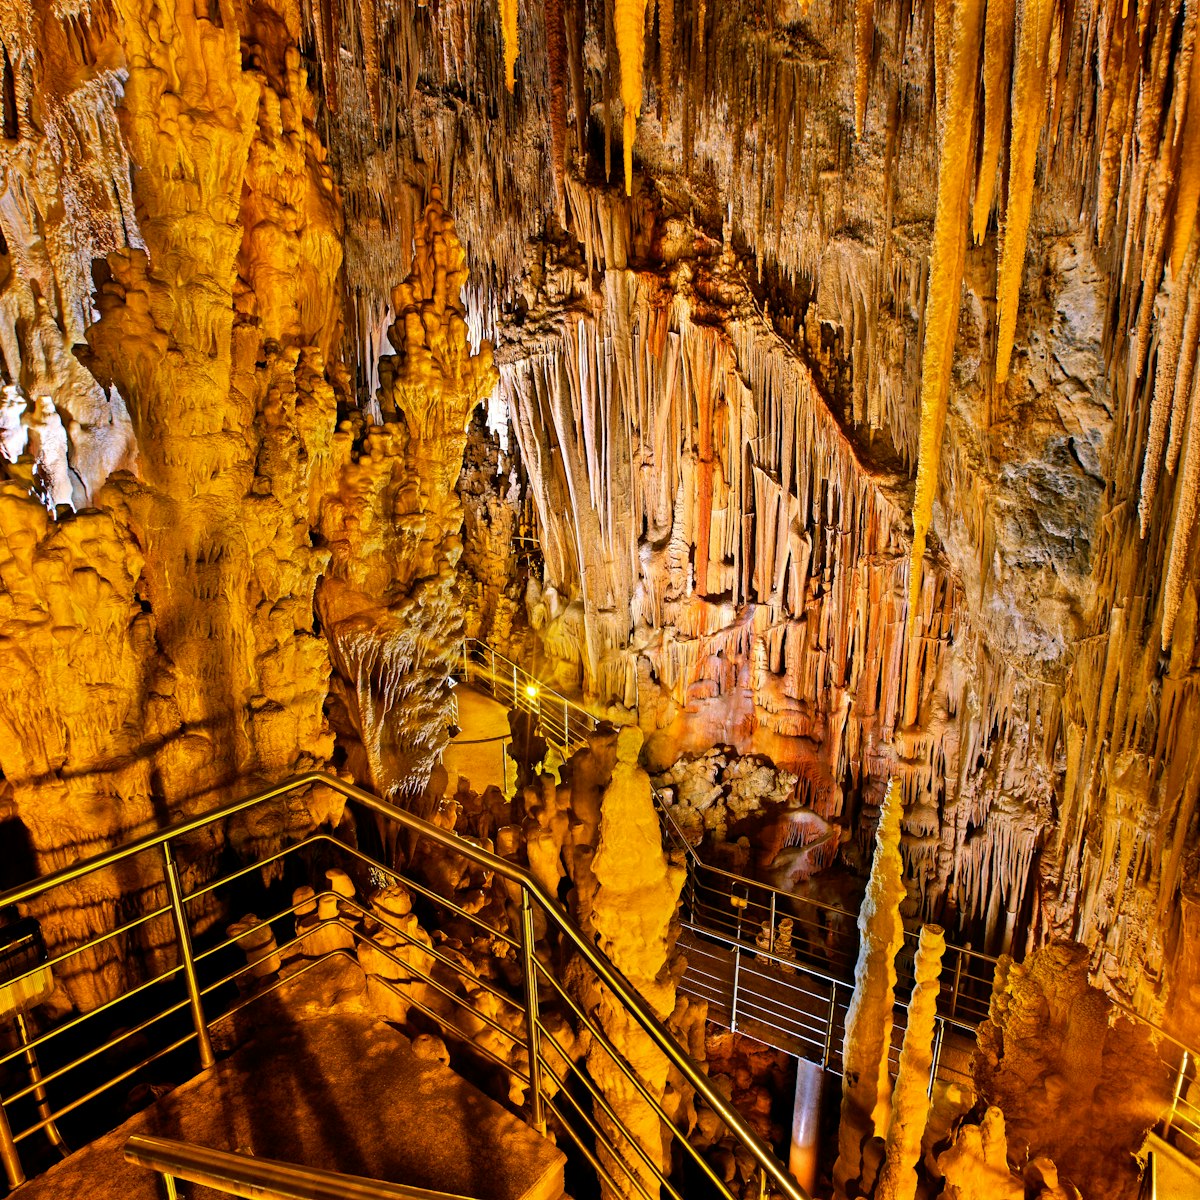 The Kastania cave.